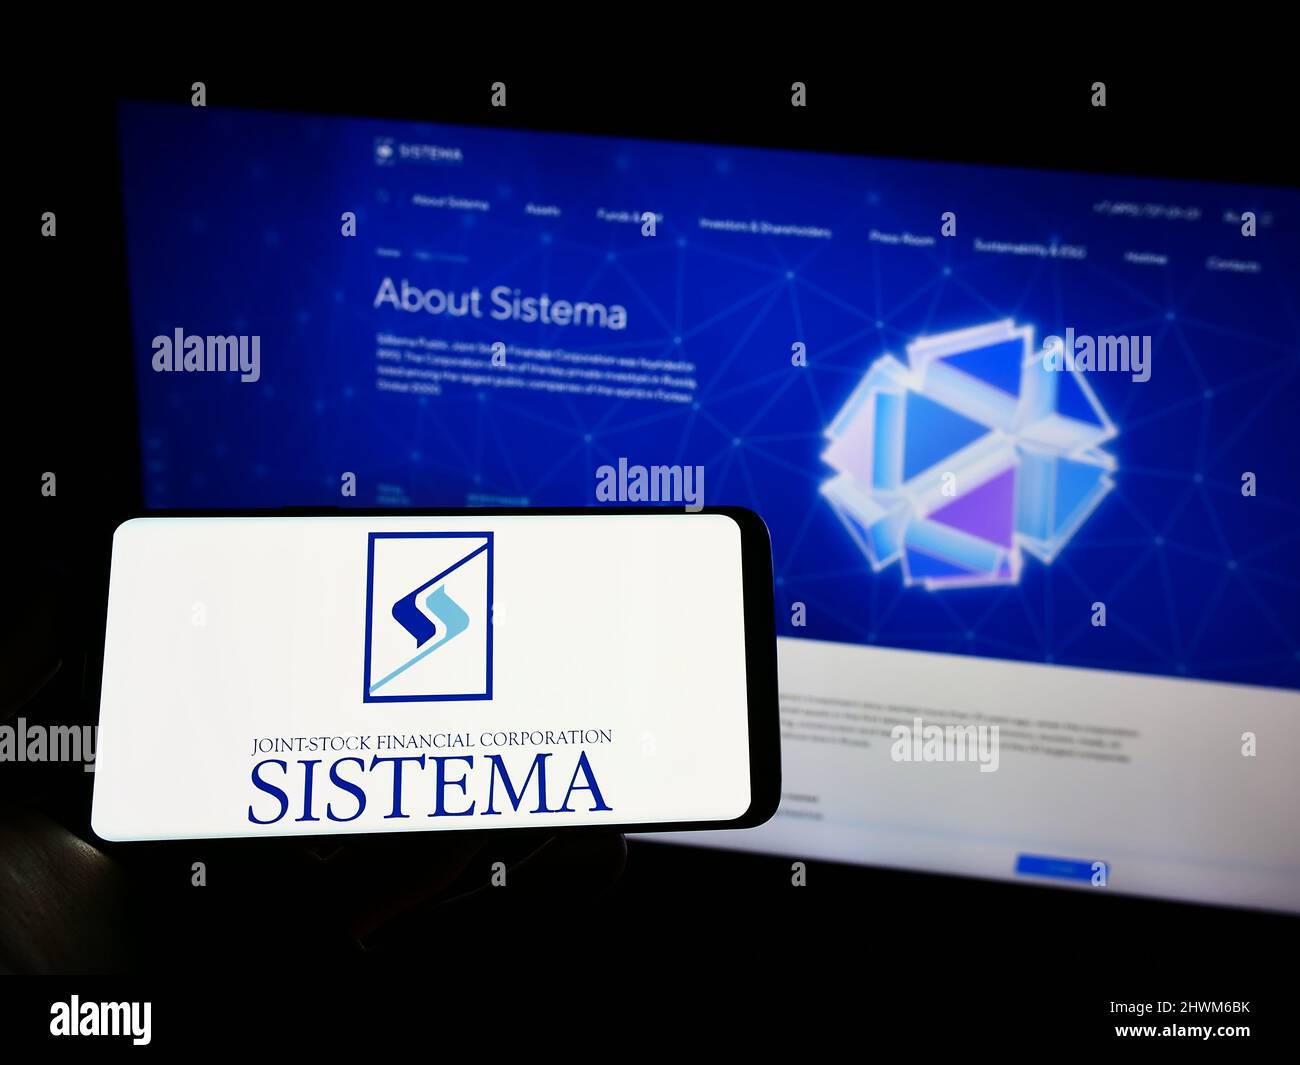 Person holding cellphone with logo of Russian conglomerate AFK Sistema PAO on screen in front of company webpage. Focus on phone display. Stock Photo